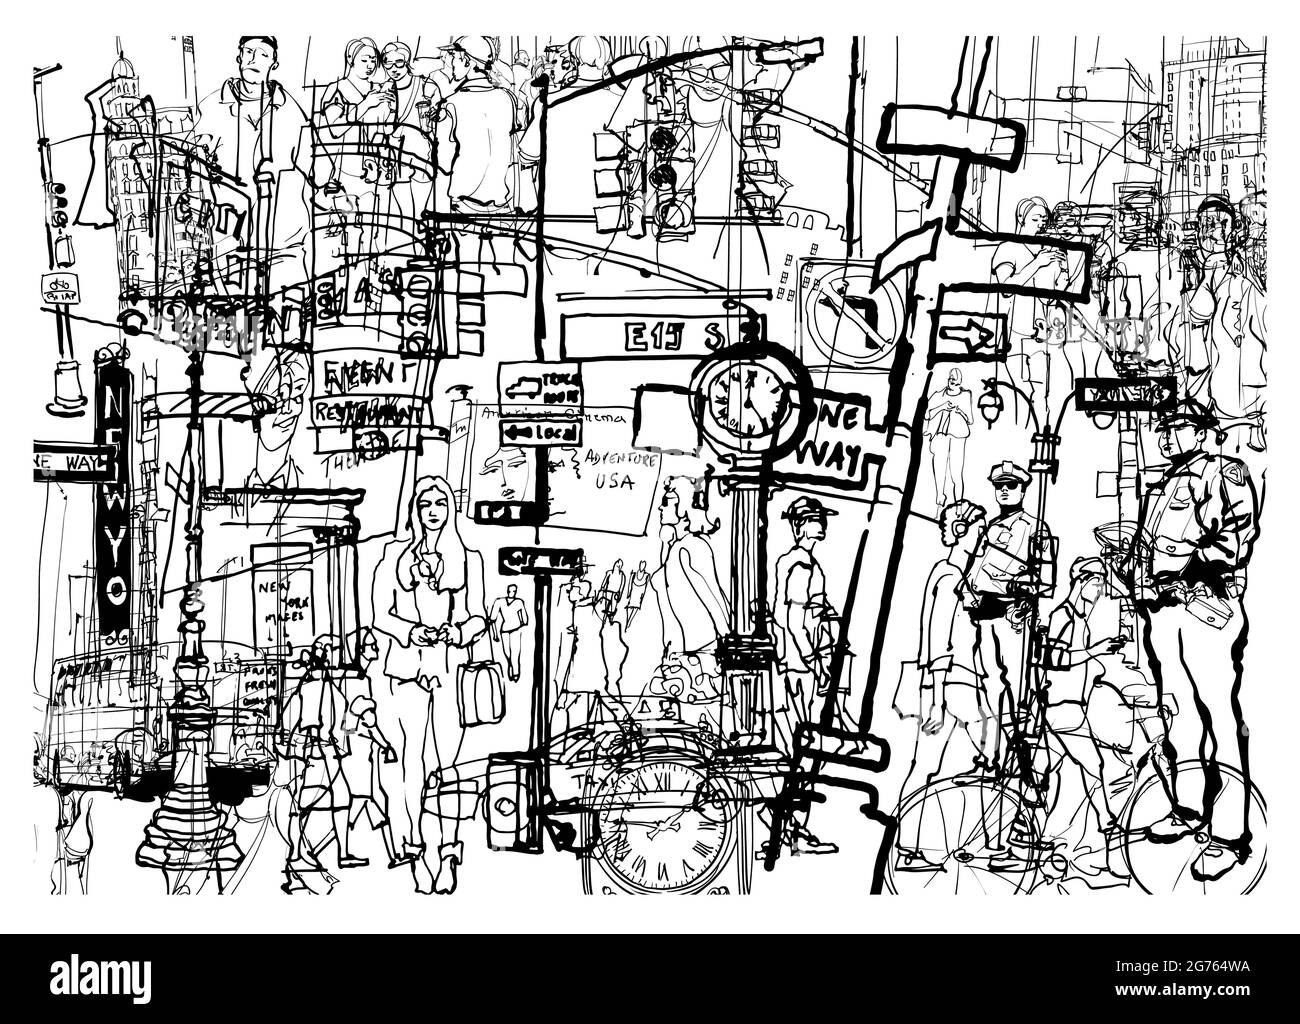 New York doodle with hand drawn elements and typical symbols of the city life - vector illustration Stock Vector